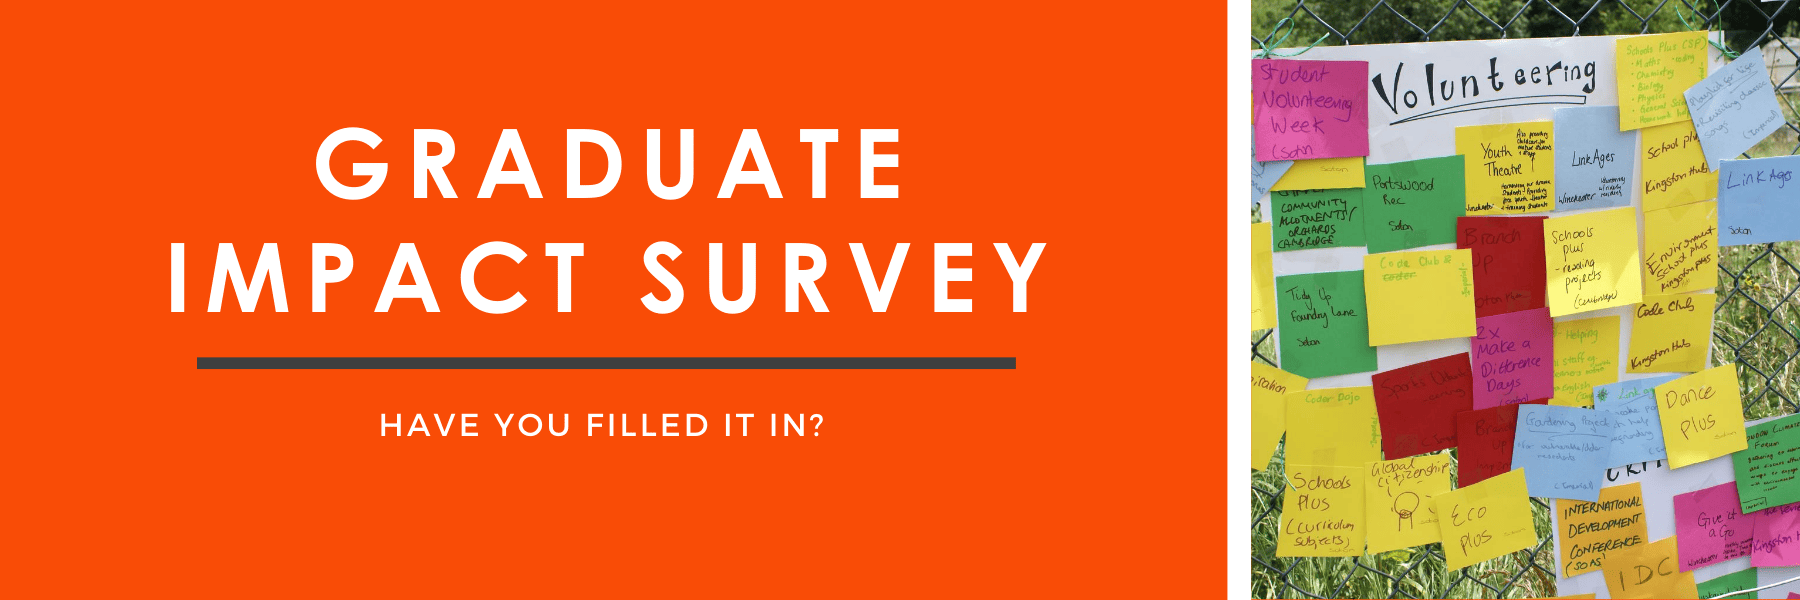 White text on orange reads "GRADUATE IMPACT SURVEY | Have you filled it in?". To the right is an image of pink, green, yellow, red and blue post-it notes stuck to a white sheet of paper titled "Volunteering". The text on the post-it notes isn't visible